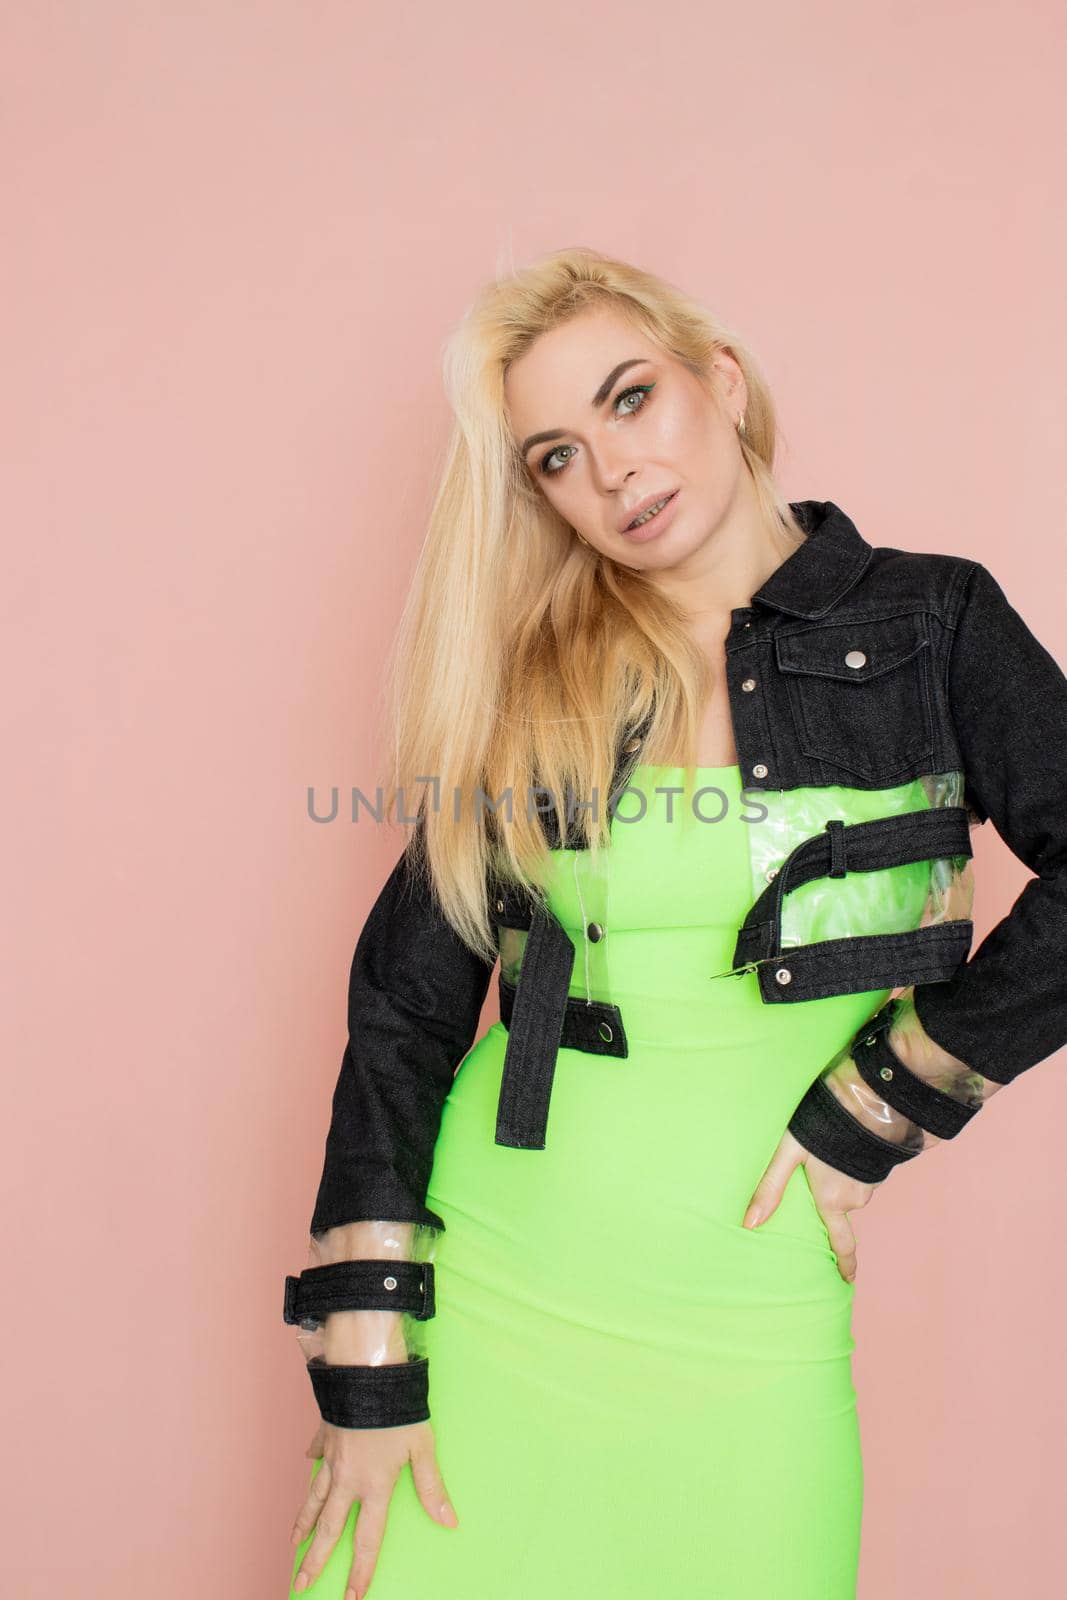 Stylish caucasian adult blonde woman wears fashionable jeans jacket and green dress, isolated over pink studio wall.